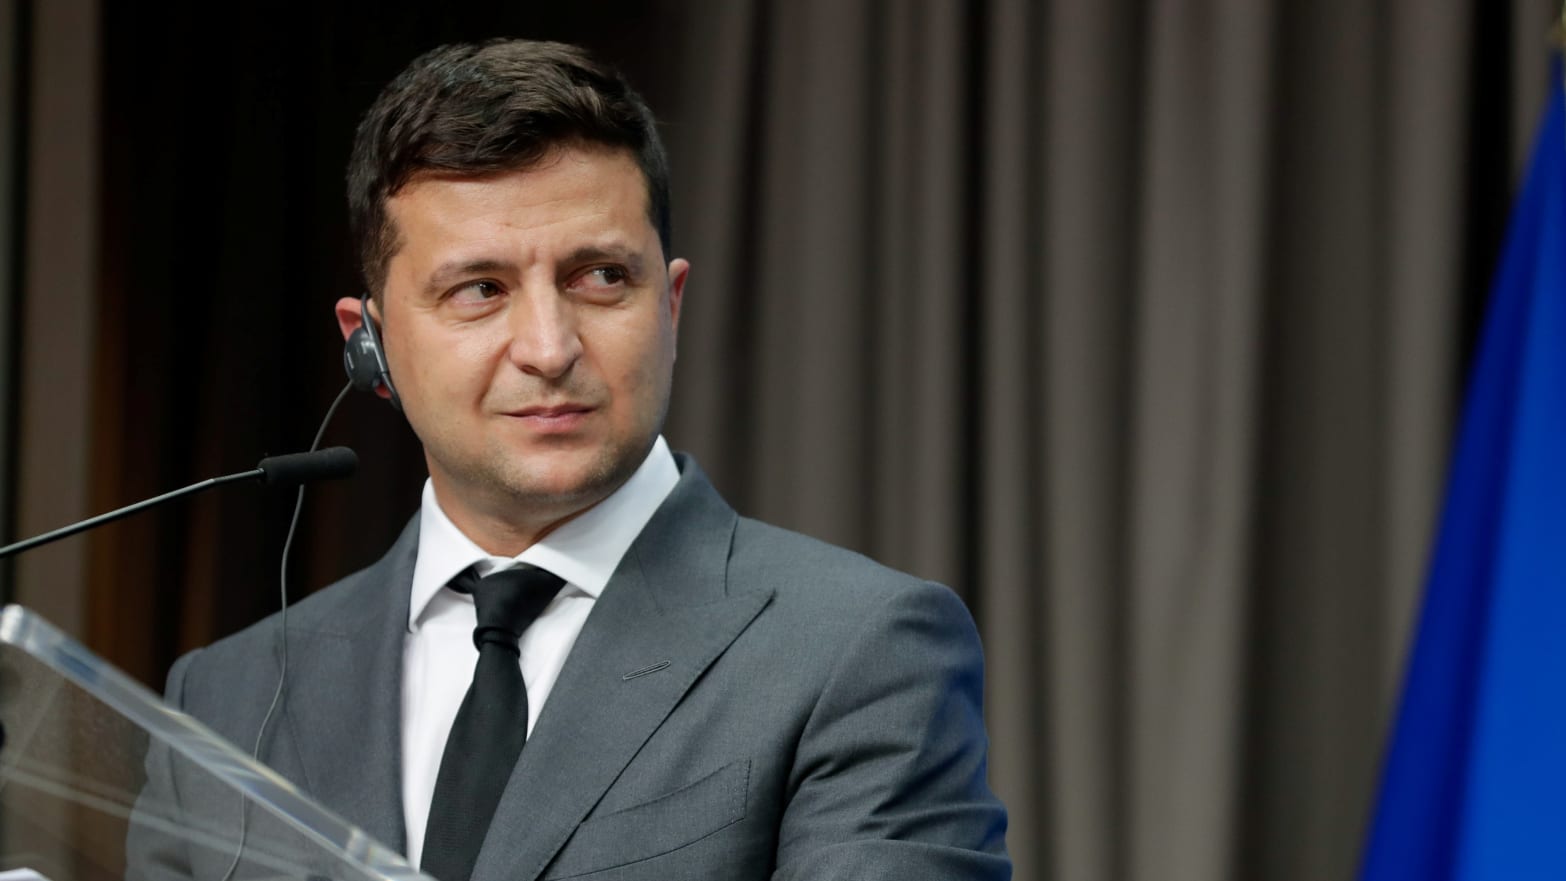 Ukraine President Volodymyr Zelensky criticized NATO’s “absurd” lack of a timetable for when his country can join the alliance ahead of the NATO summit in Vilnius, Lithuania.